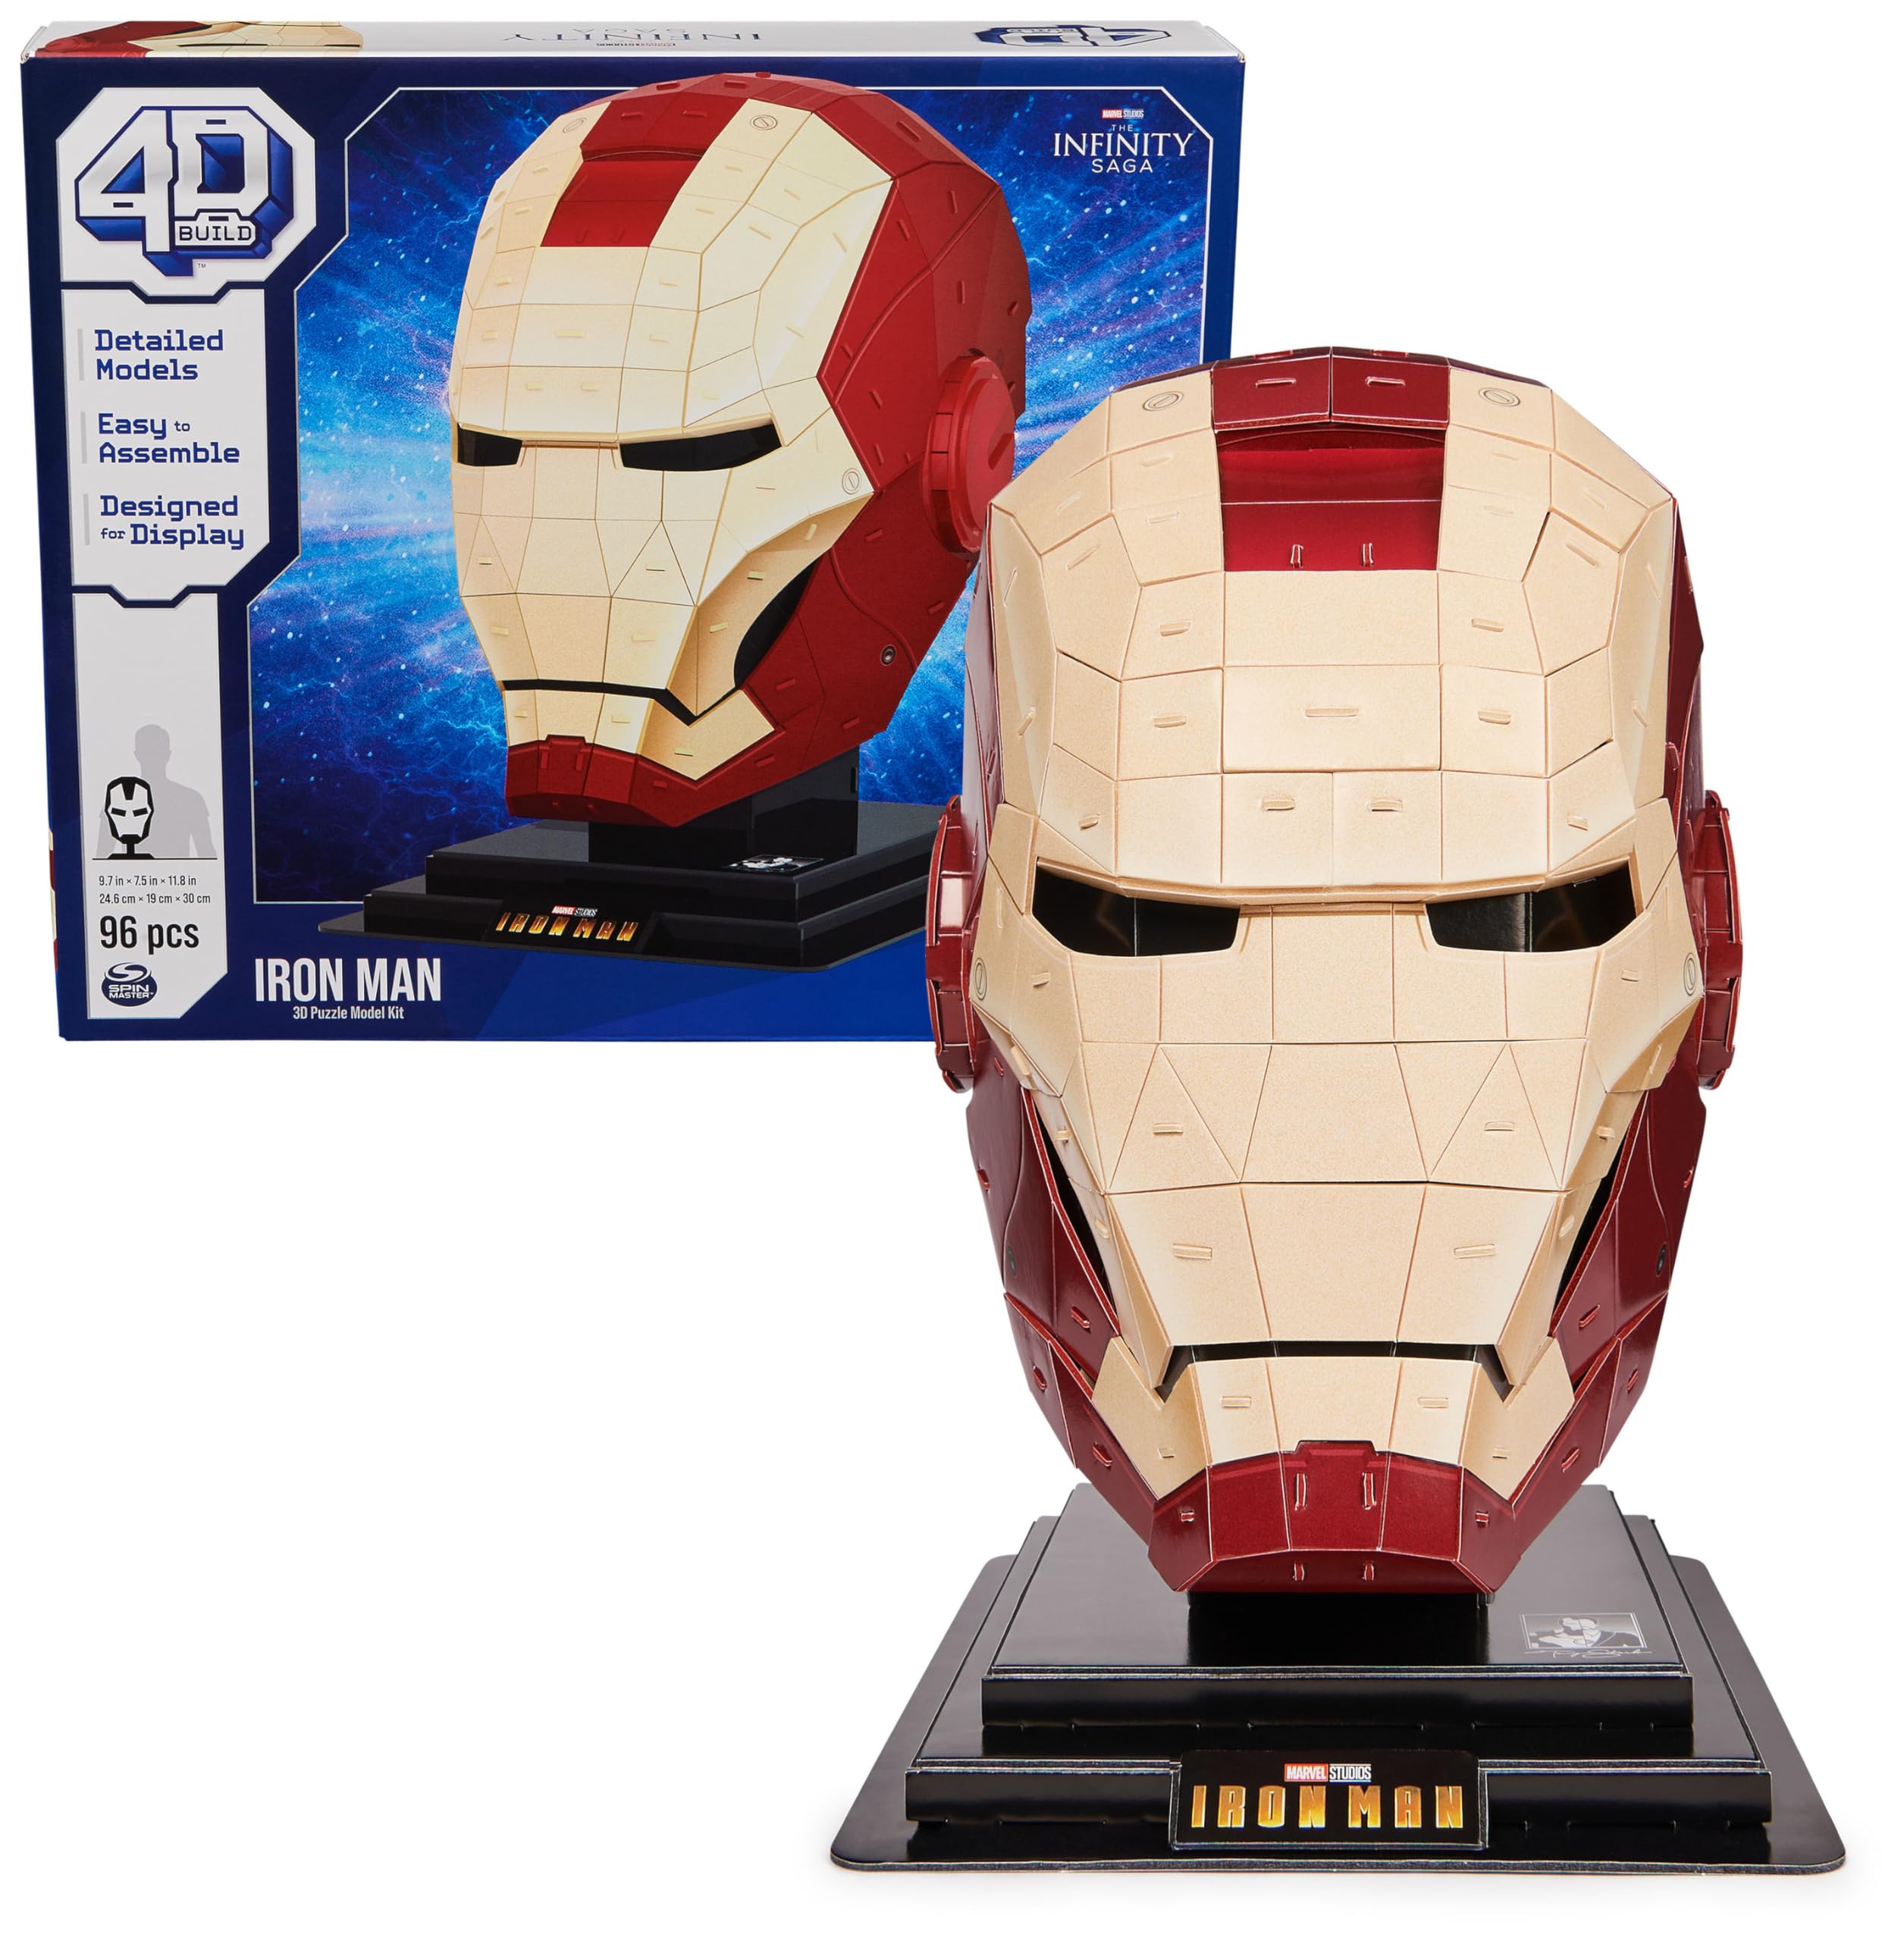 96-Piece 4D Build Marvel Iron Man Helmet 3D Puzzle Model Kit w/ Stand $8.86 + Free Shipping w/ Prime or on orders over $35